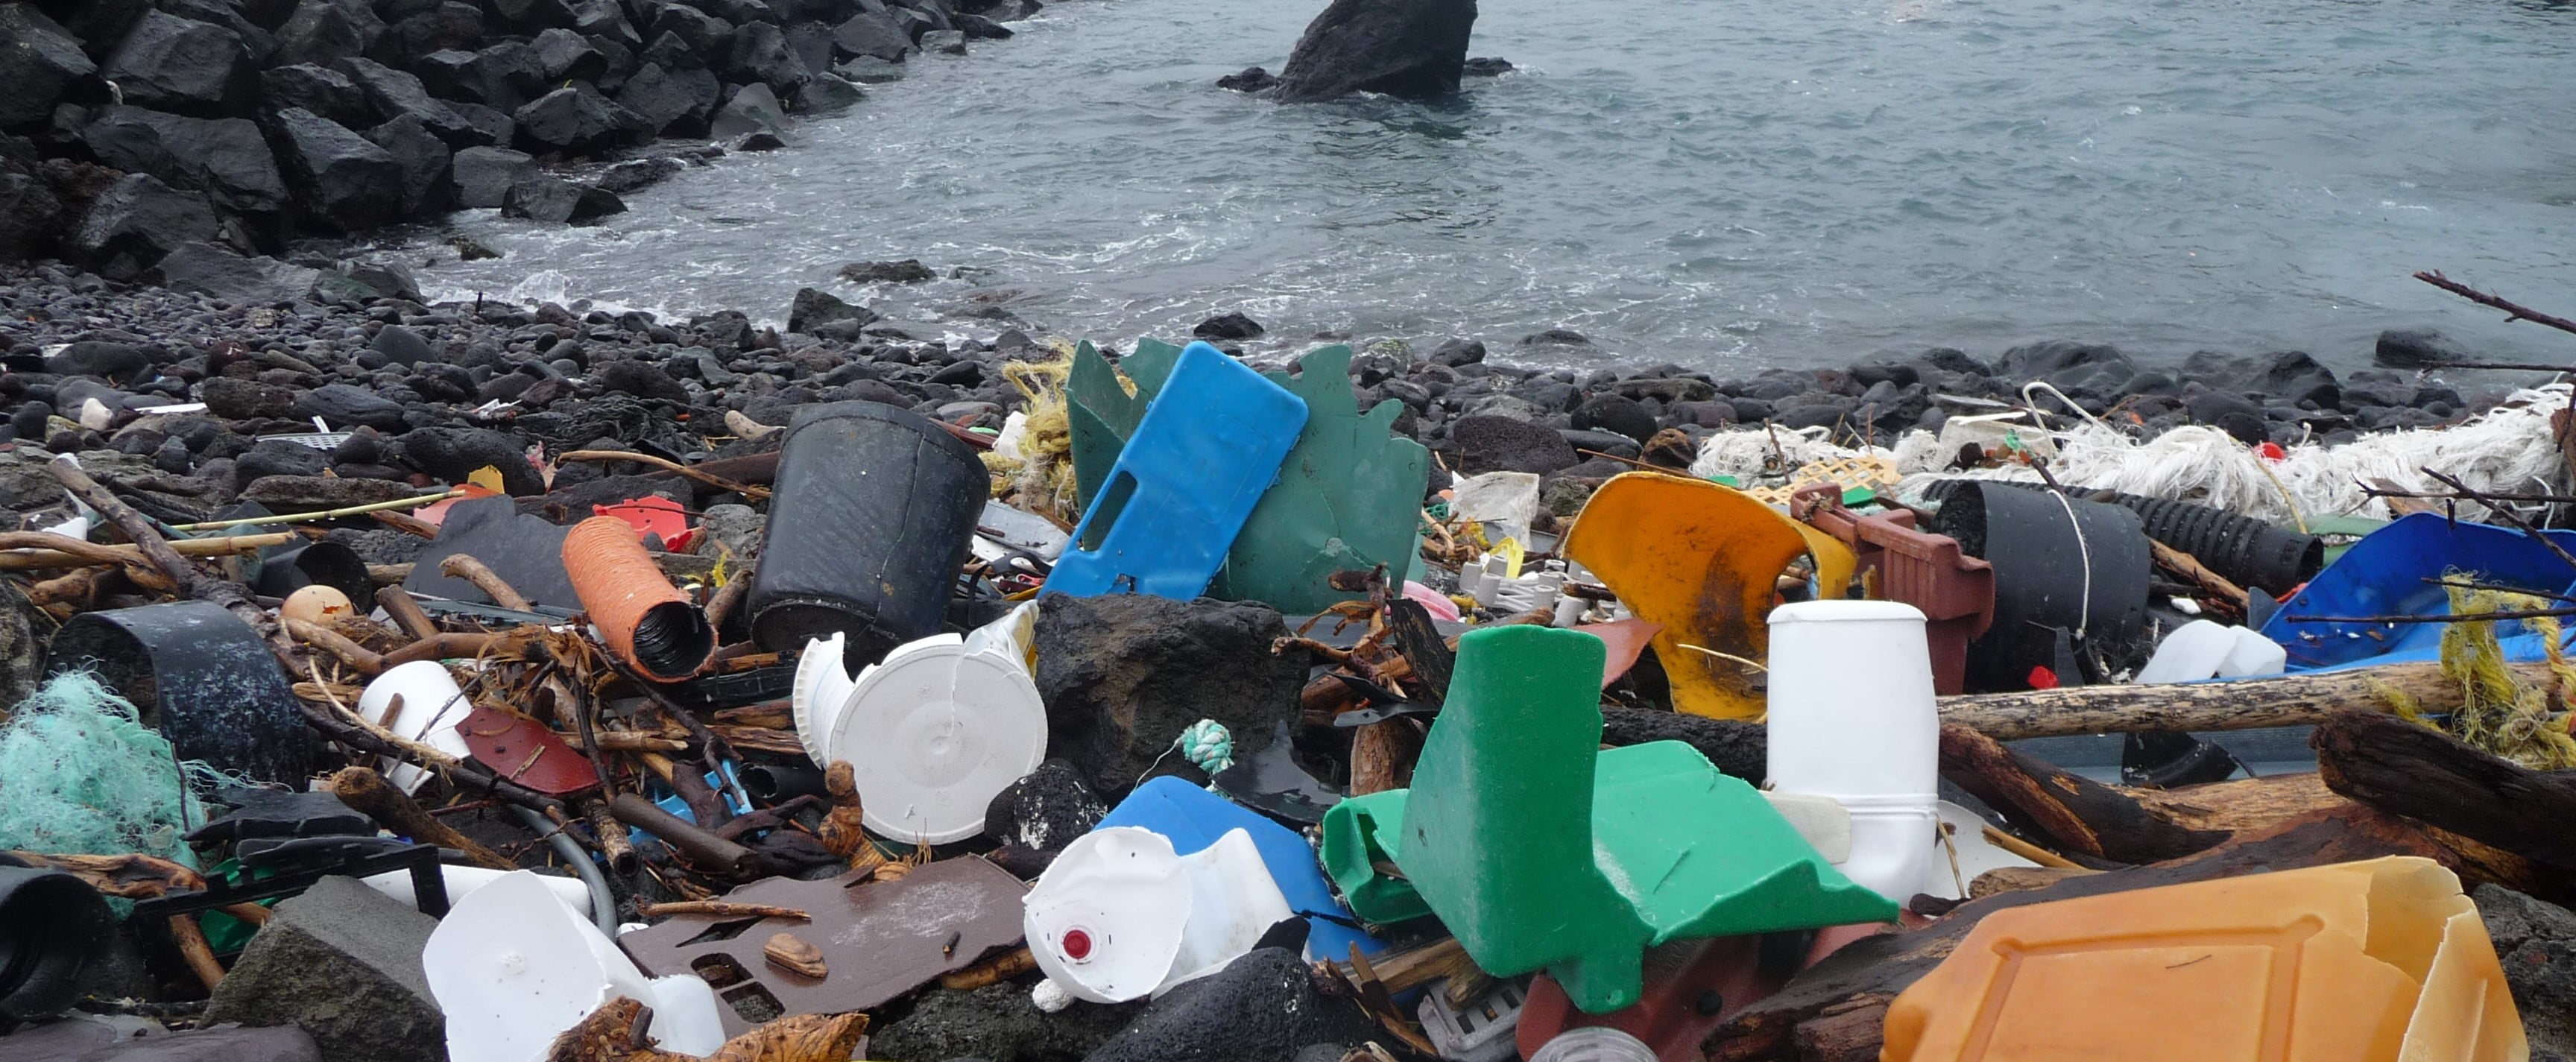 Plastic Debris That Has Washed Up Along The Shore Of The Azores Photo Courtesy Of 5 Gyres E1419868470669 مجلة نقطة العلمية